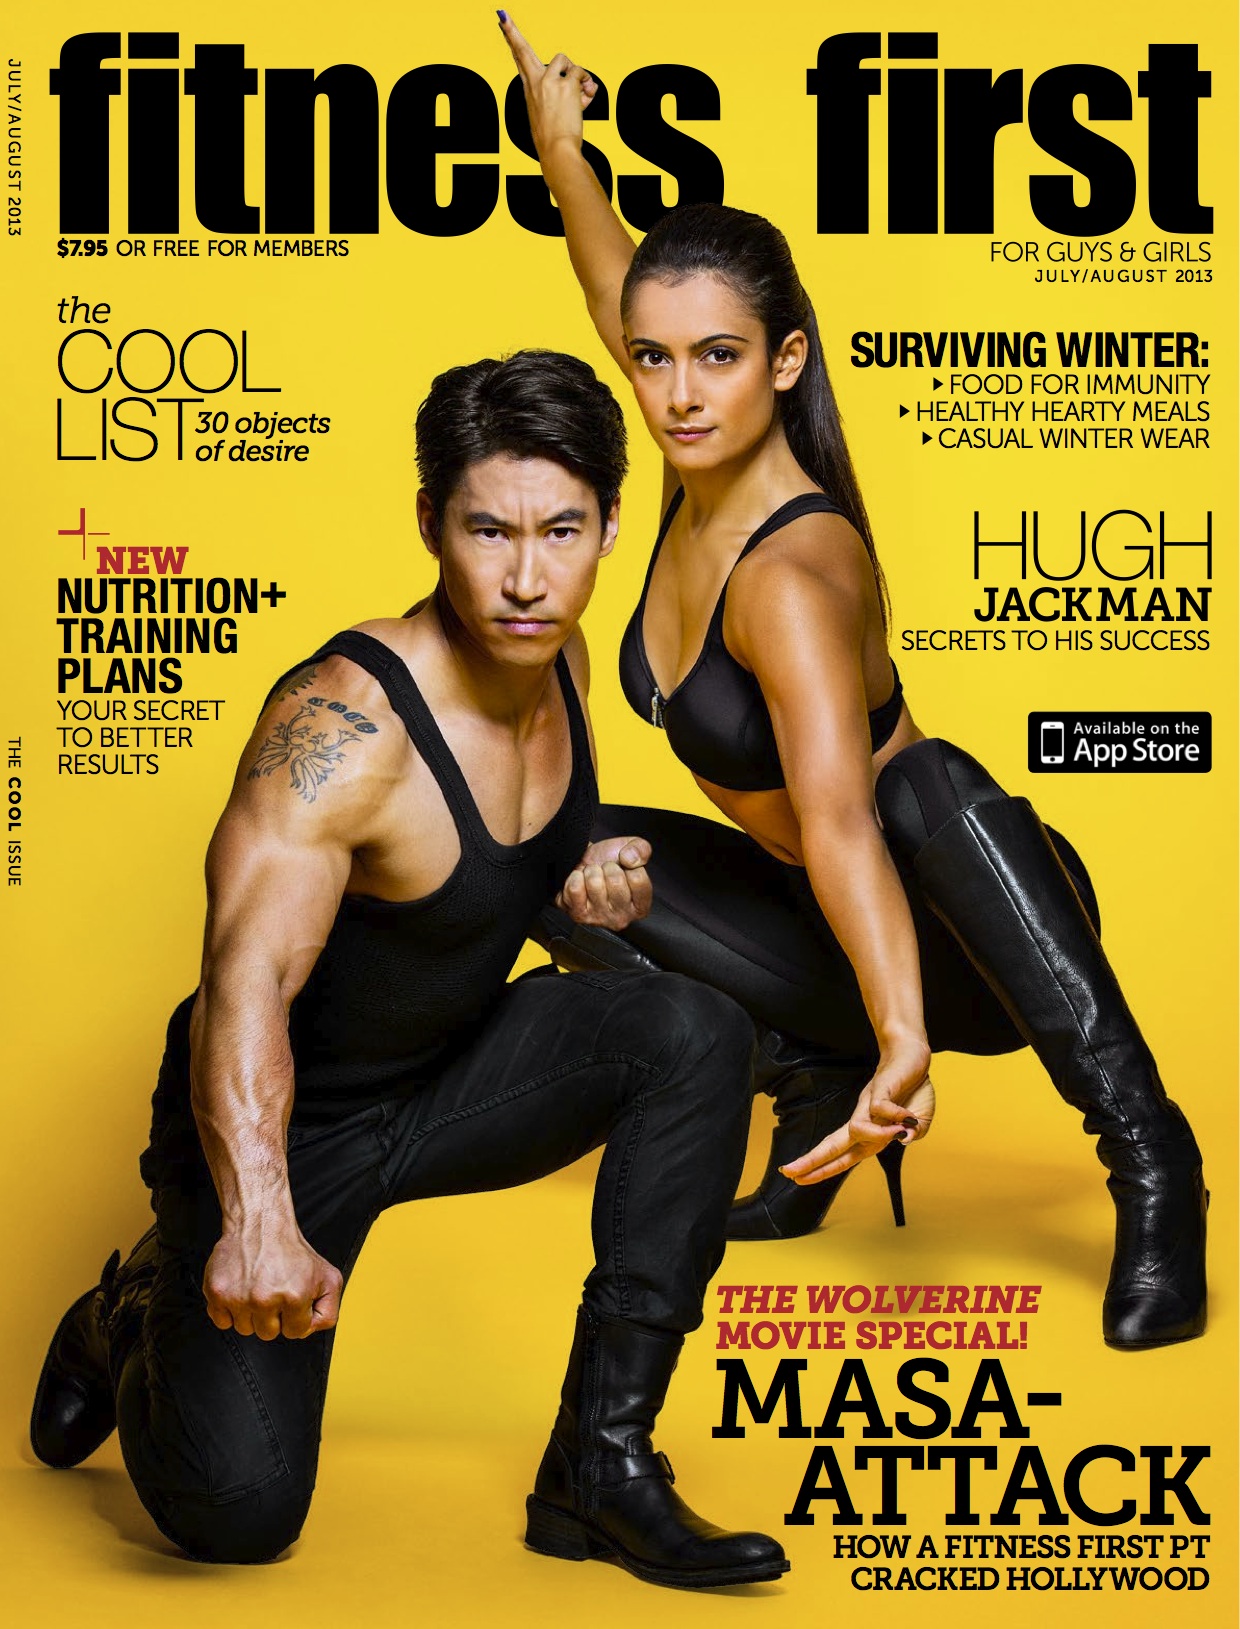 FITNESS FIRST MAGAZINE COVER- JULY /AUGUST 2013 EDITION